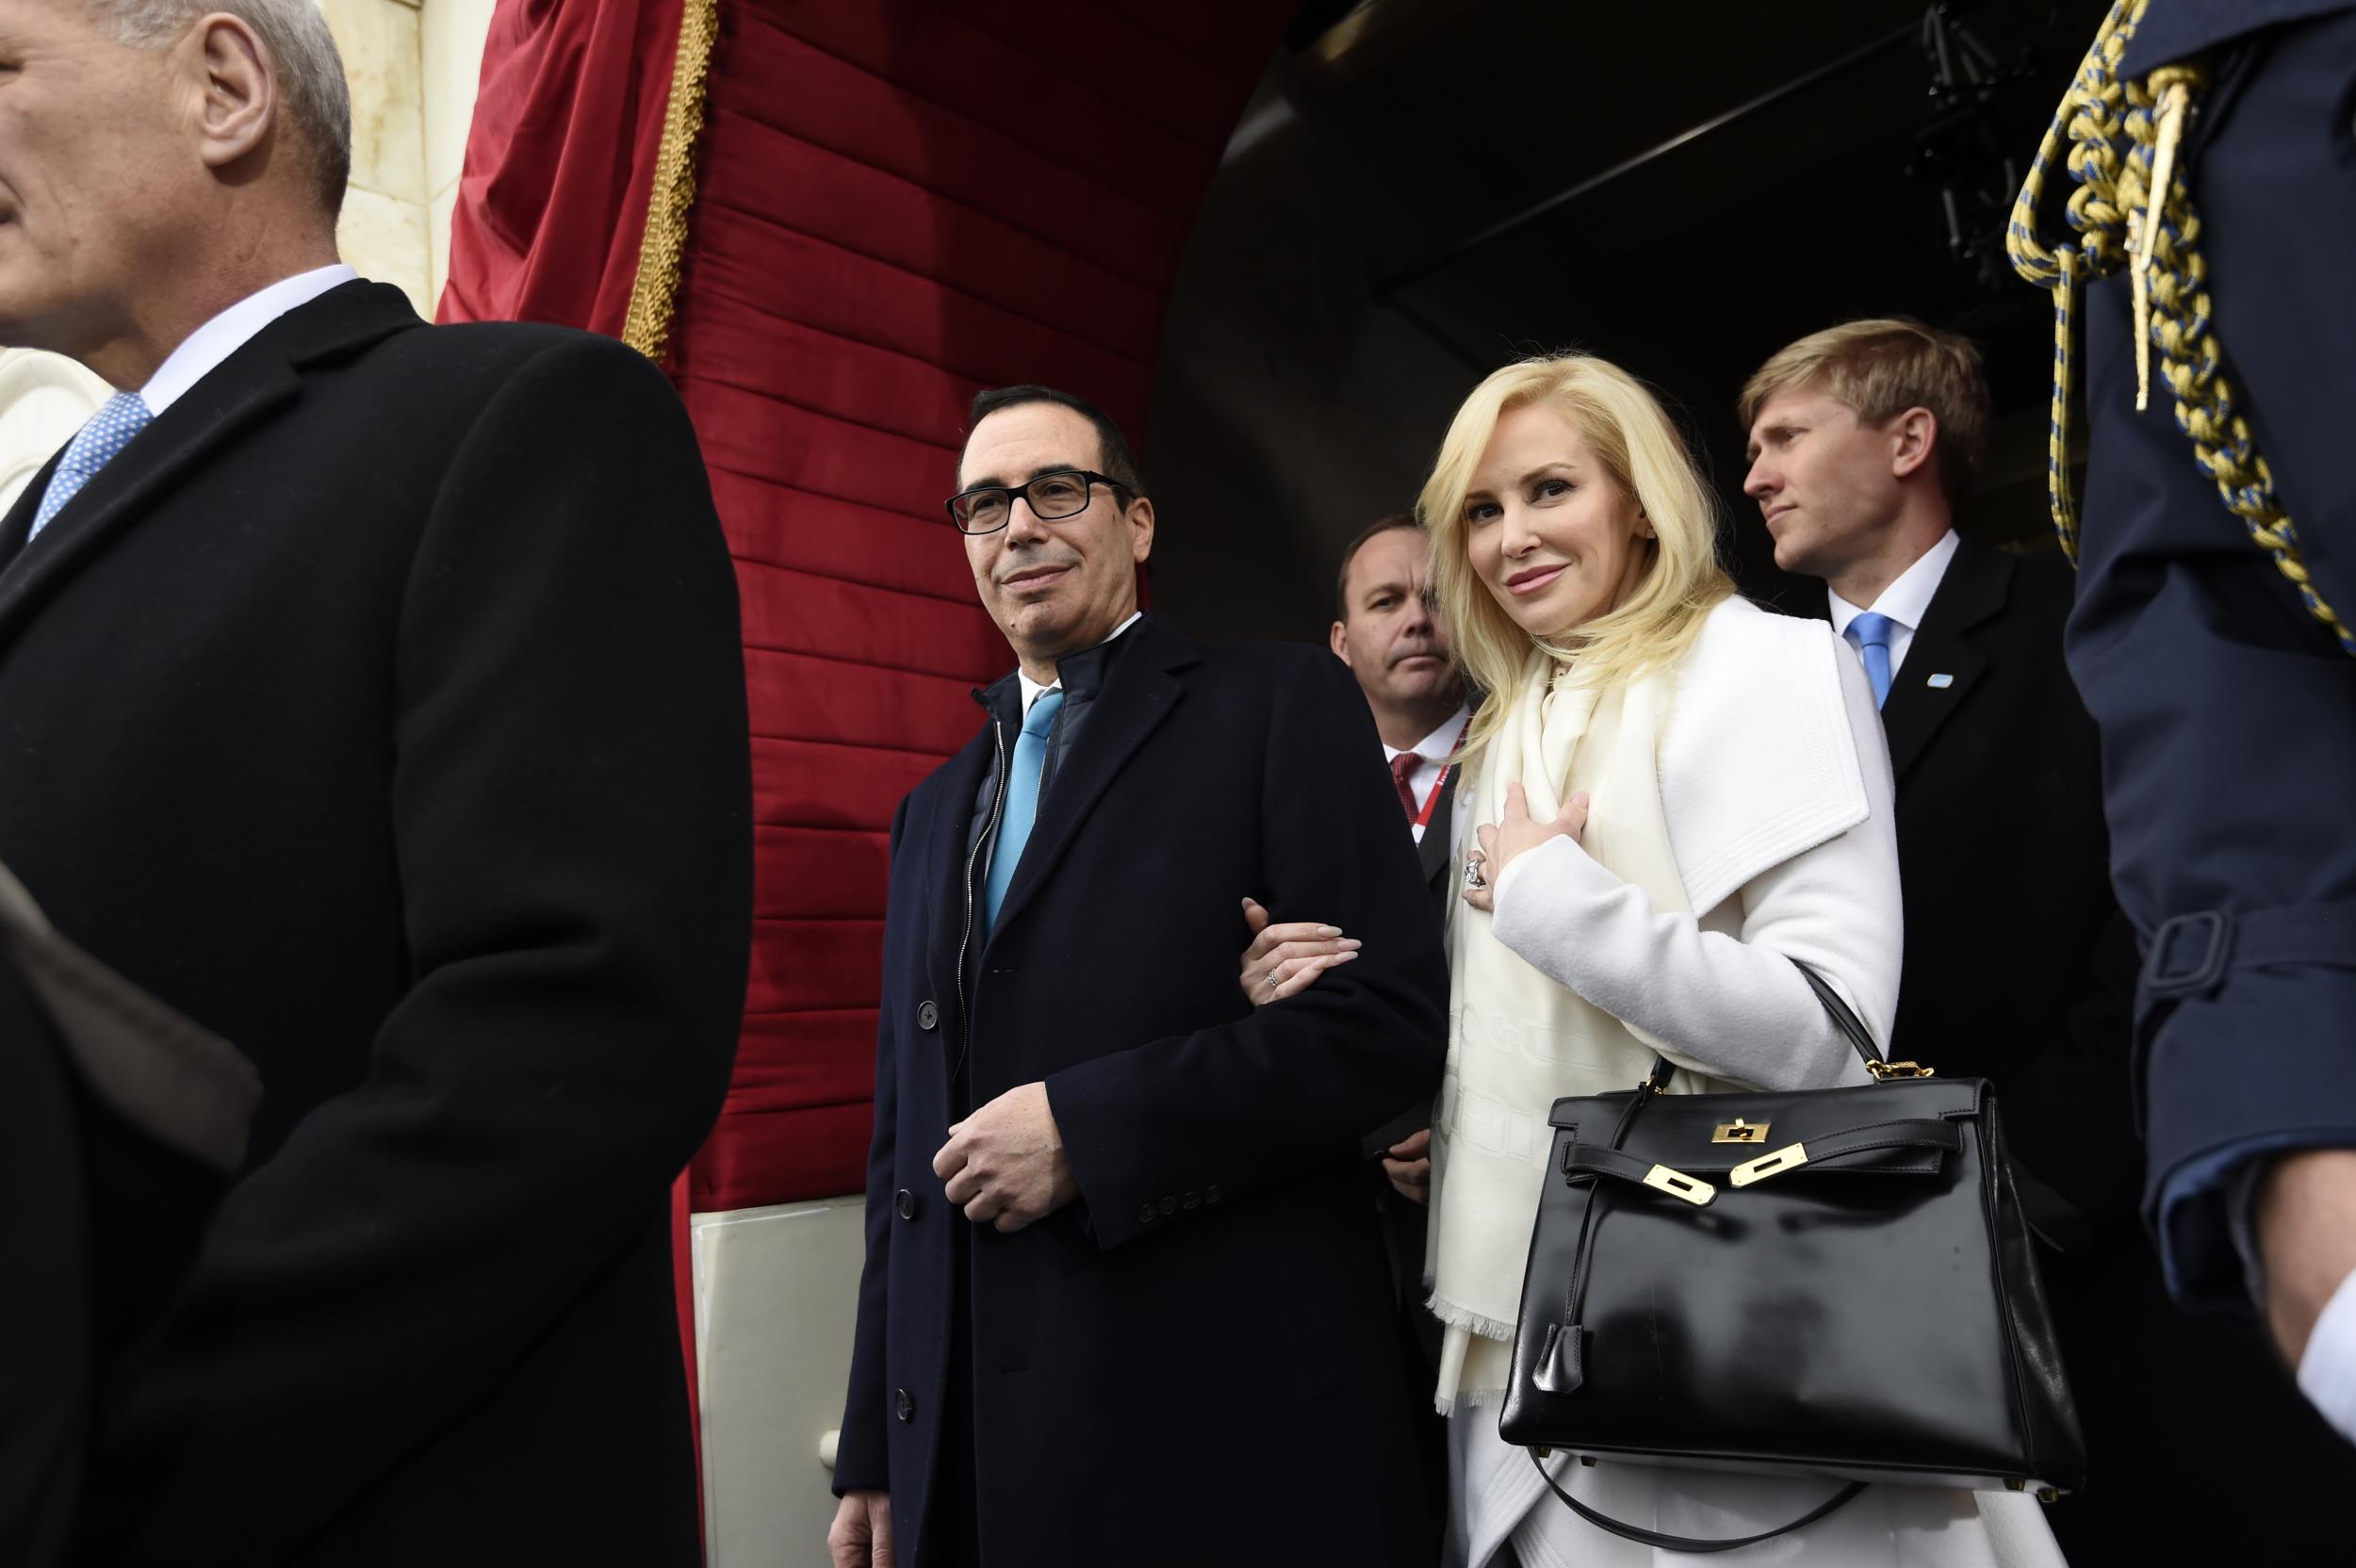 Steven Mnuchin is married to Scottish actress Louise Linton, who recently came under fire for boasting about her wealth